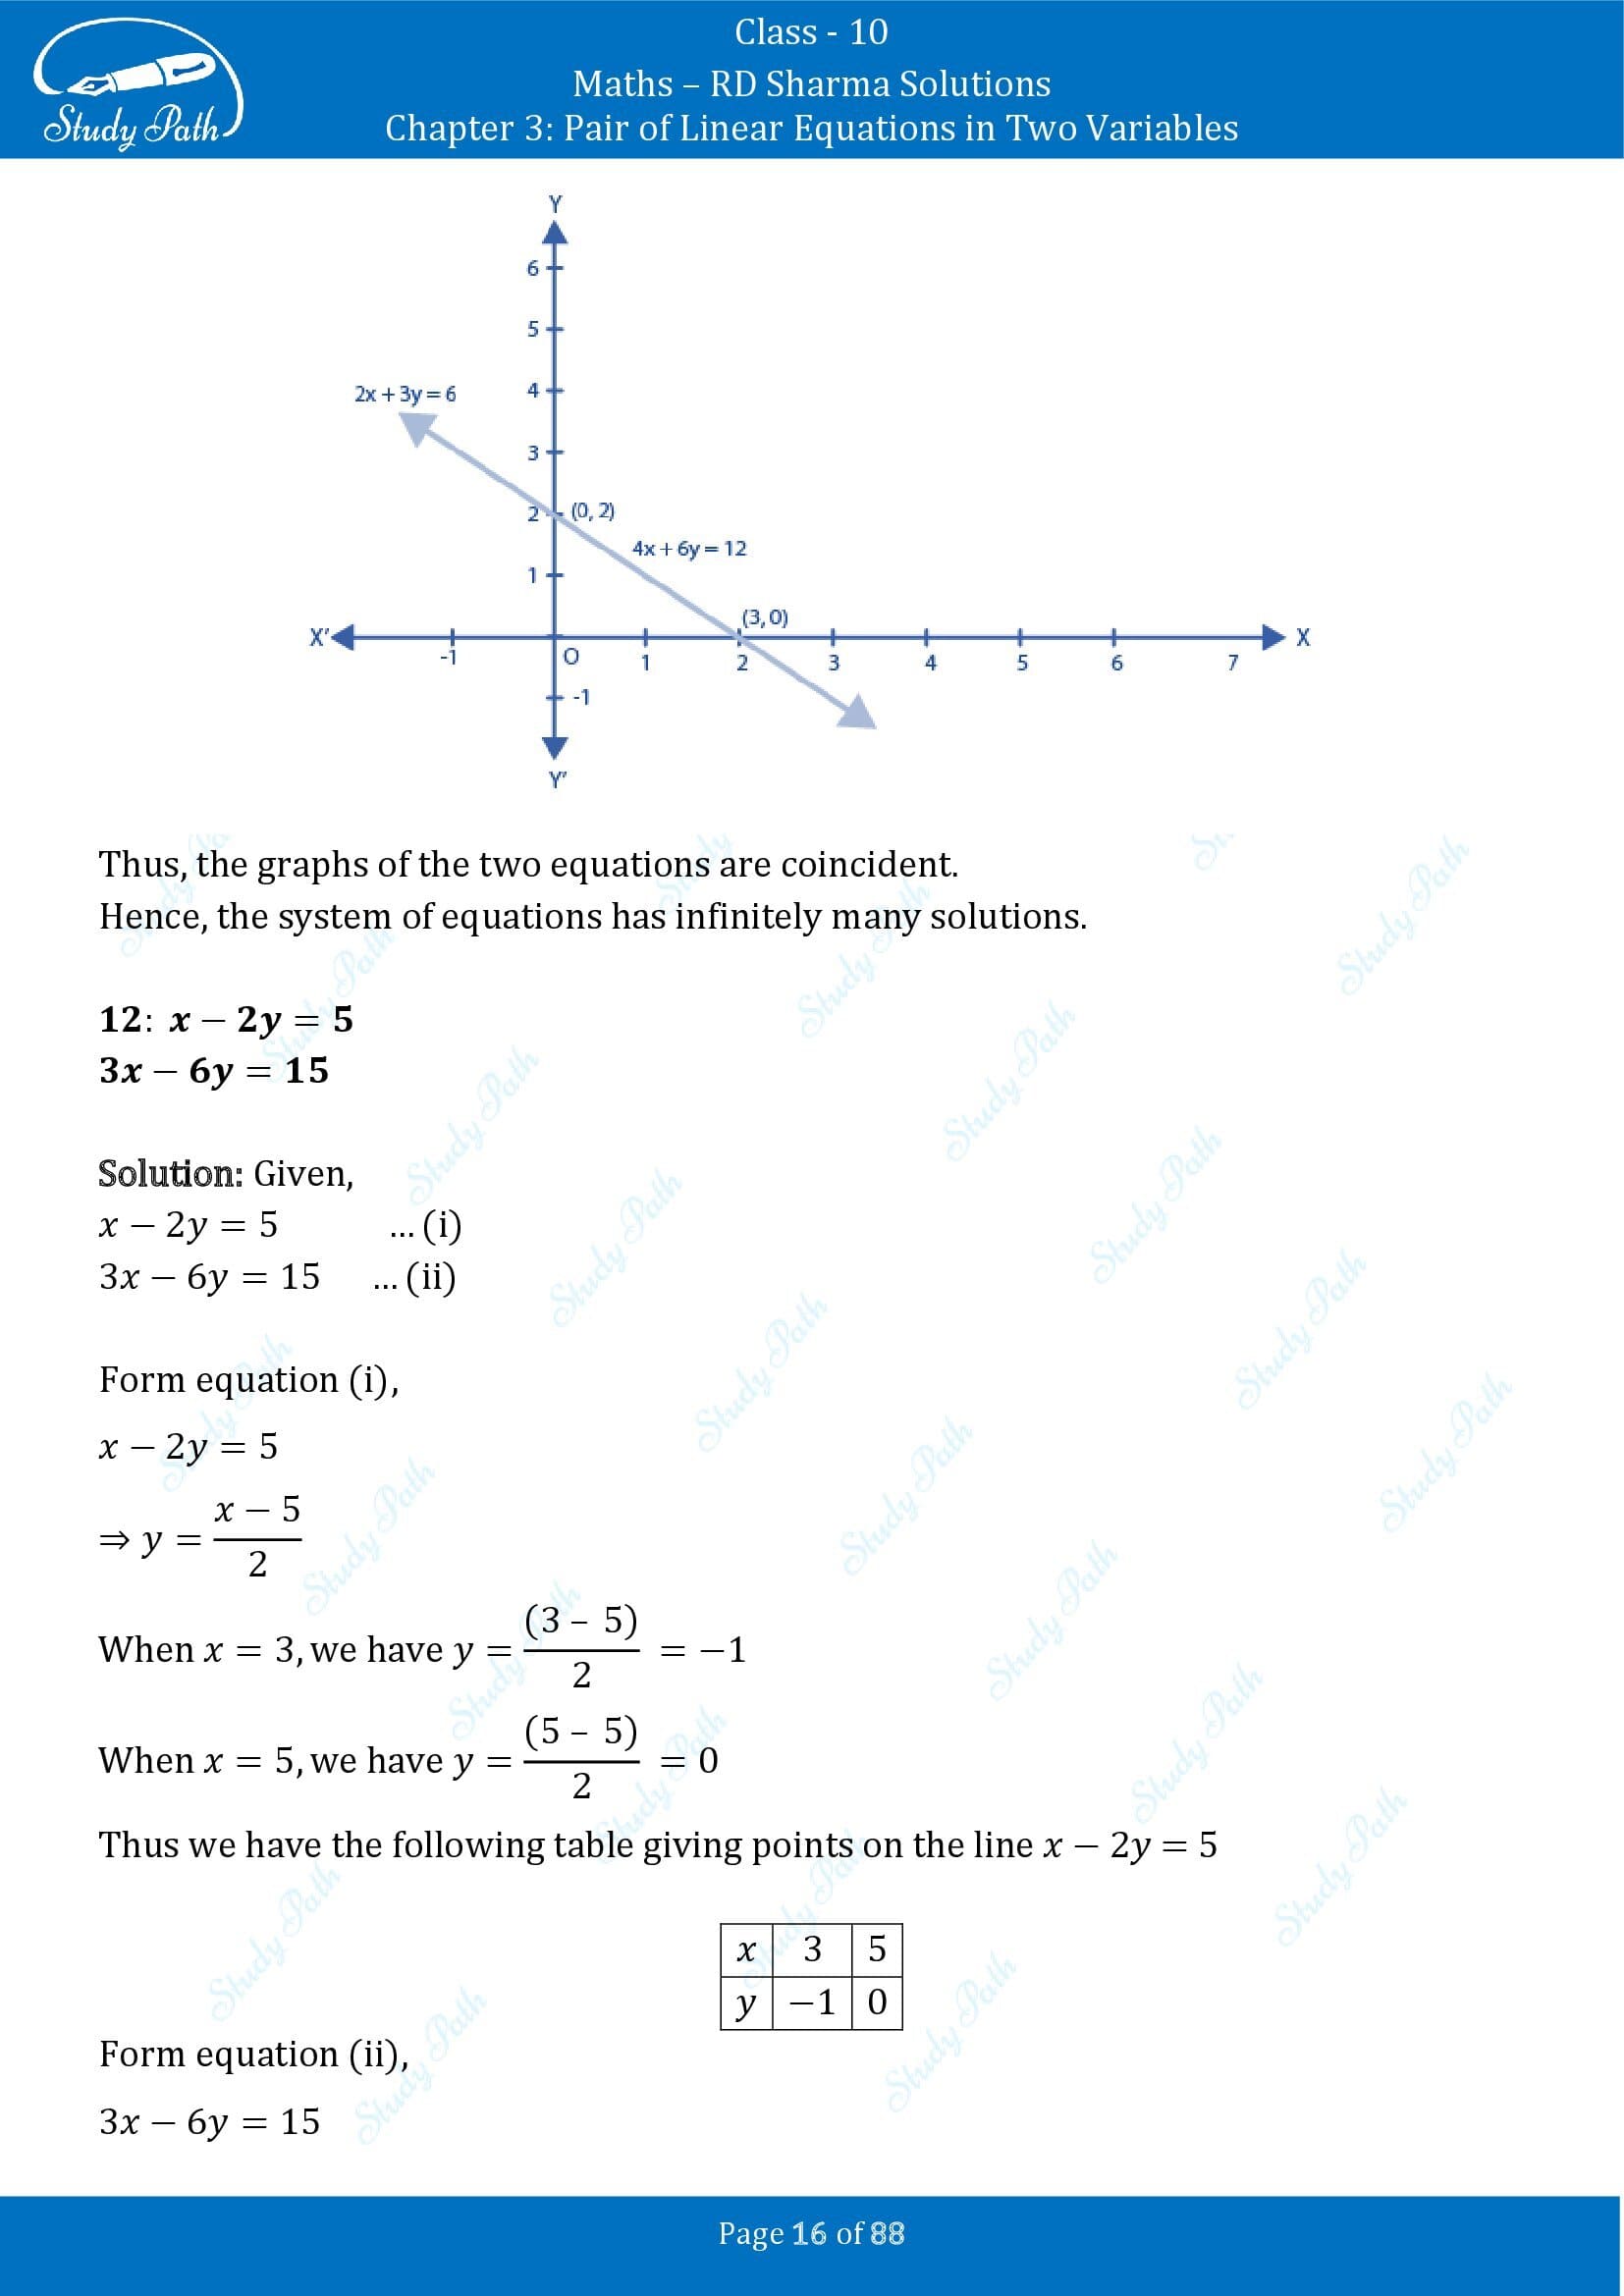 RD Sharma Solutions Class 10 Chapter 3 Pair of Linear Equations in Two Variables Exercise 3.2 00016